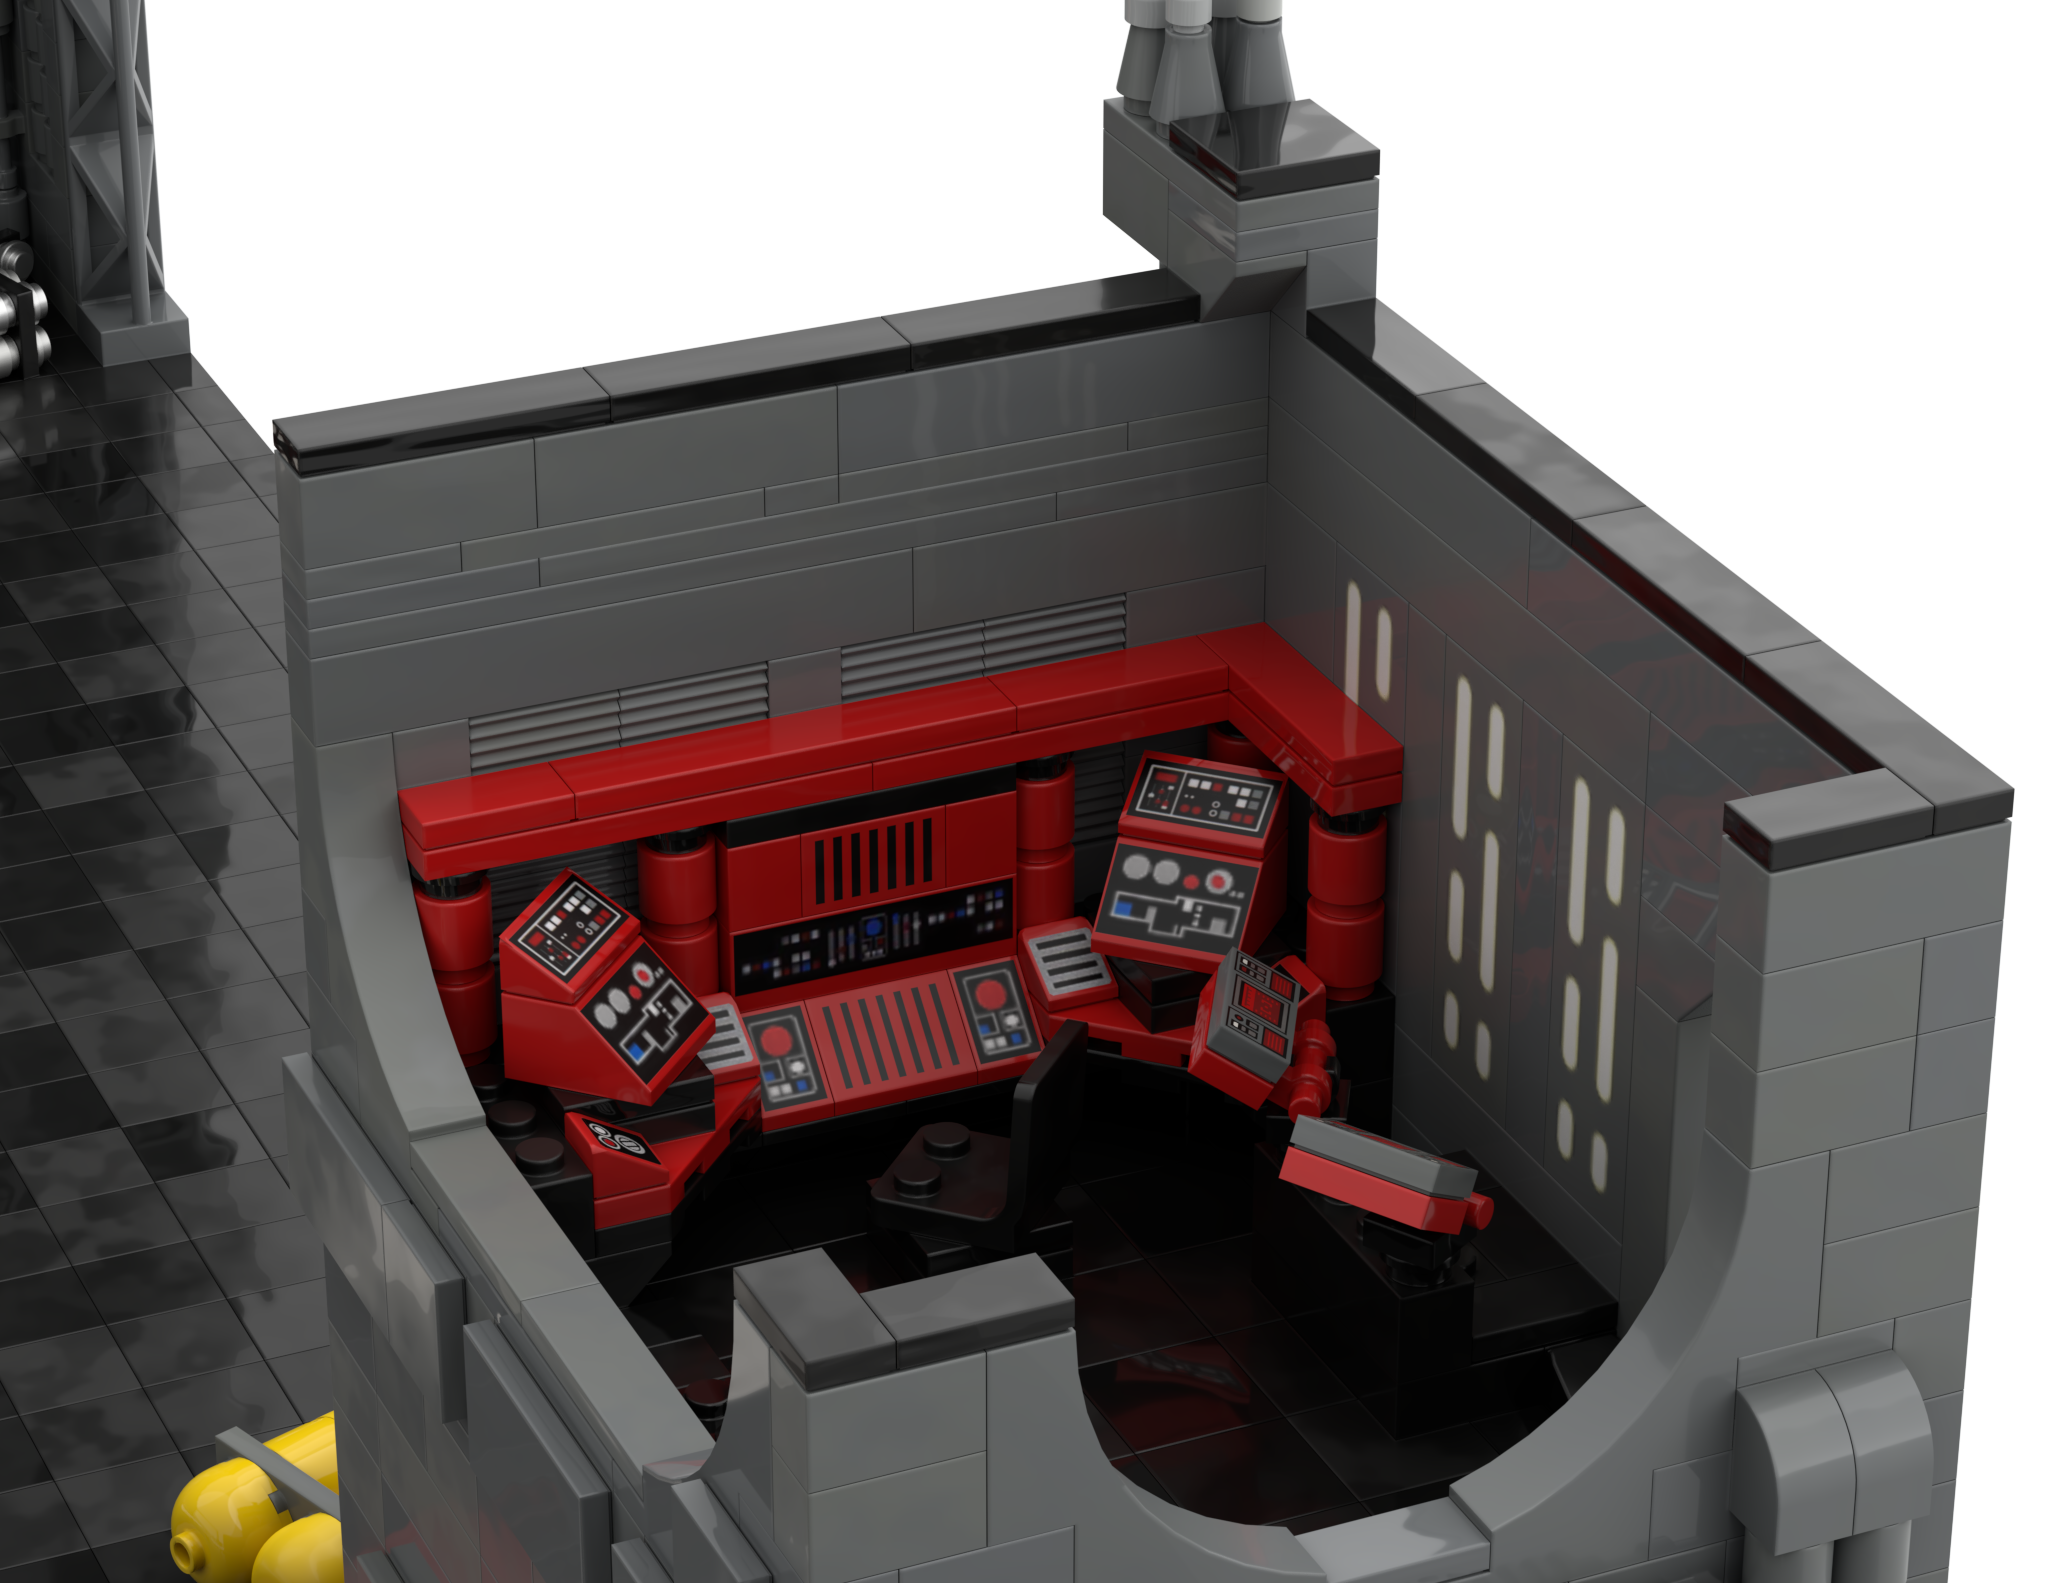 Docking Bay 327 MOC-69457 Star Wars With 10061 Pieces